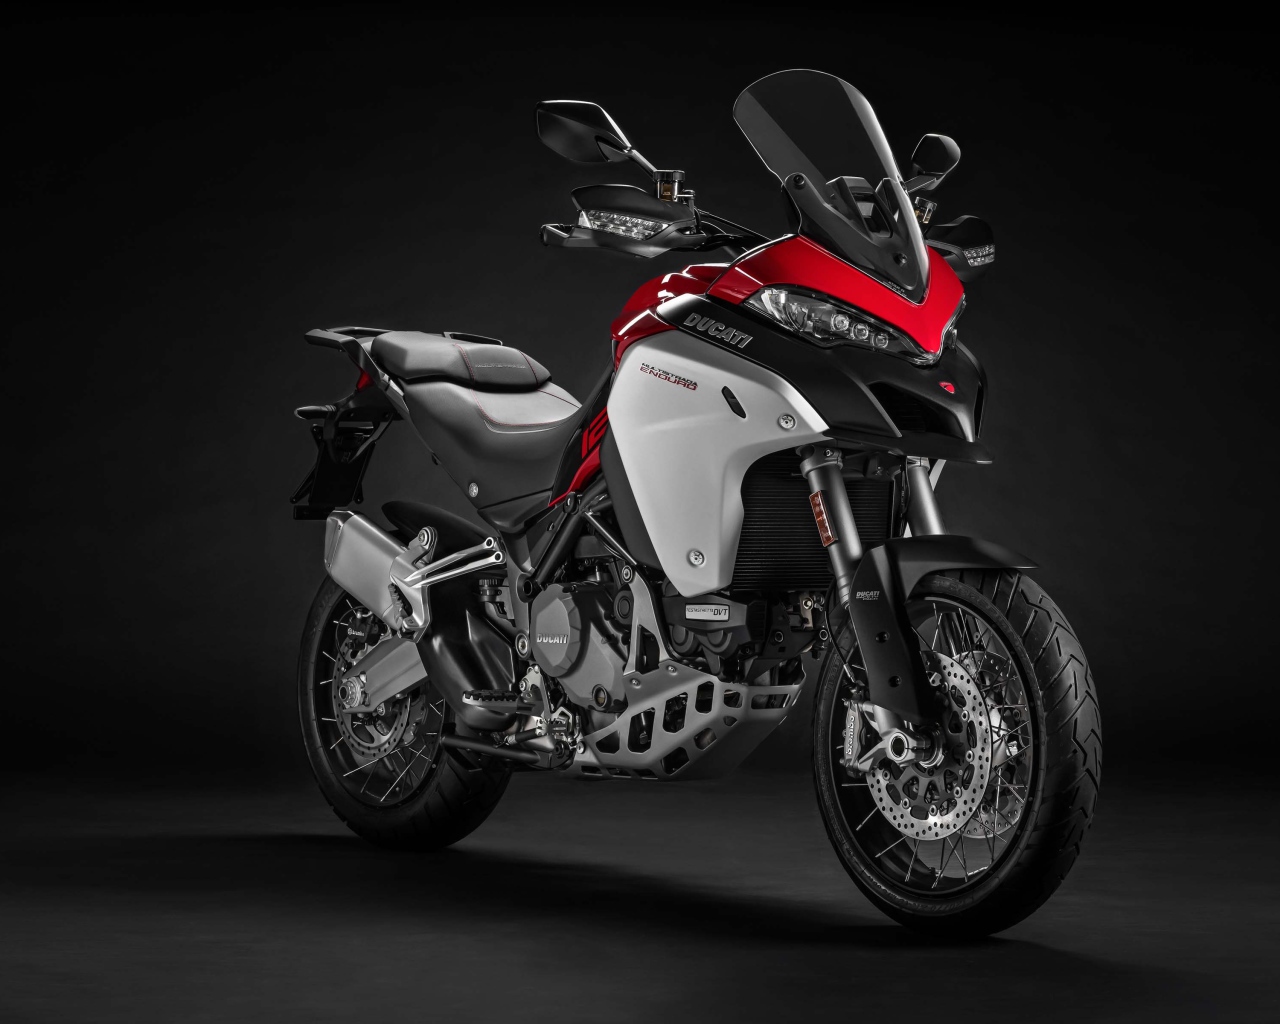 Motorcycle Ducati Multistrada 1260 Enduro, 2019 year on a gray background